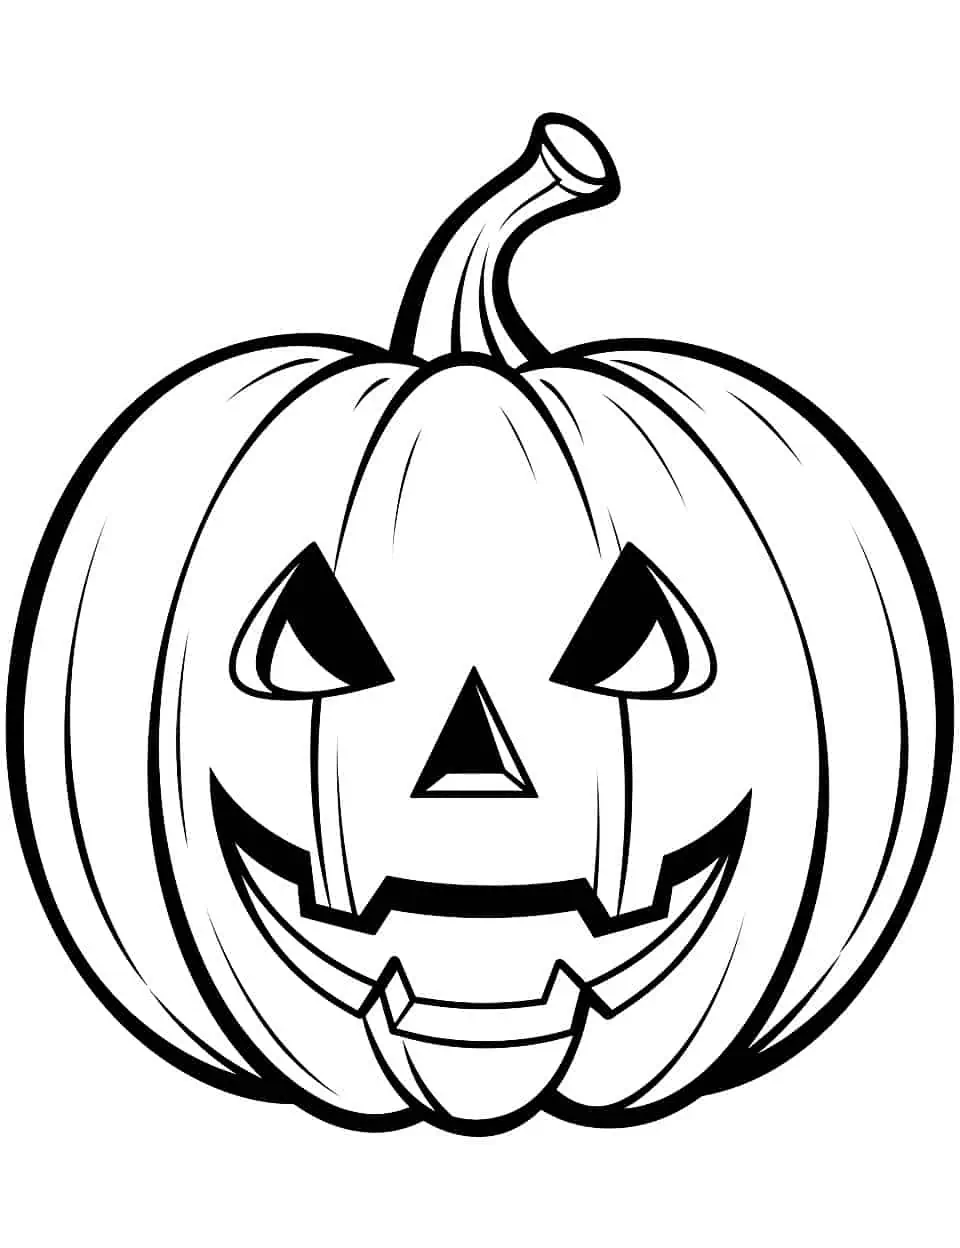 Classic Jack O' Lantern Pumpkin Coloring Page - A traditional jack o’ lantern with a menacing grin to spook out the Halloween spirit.